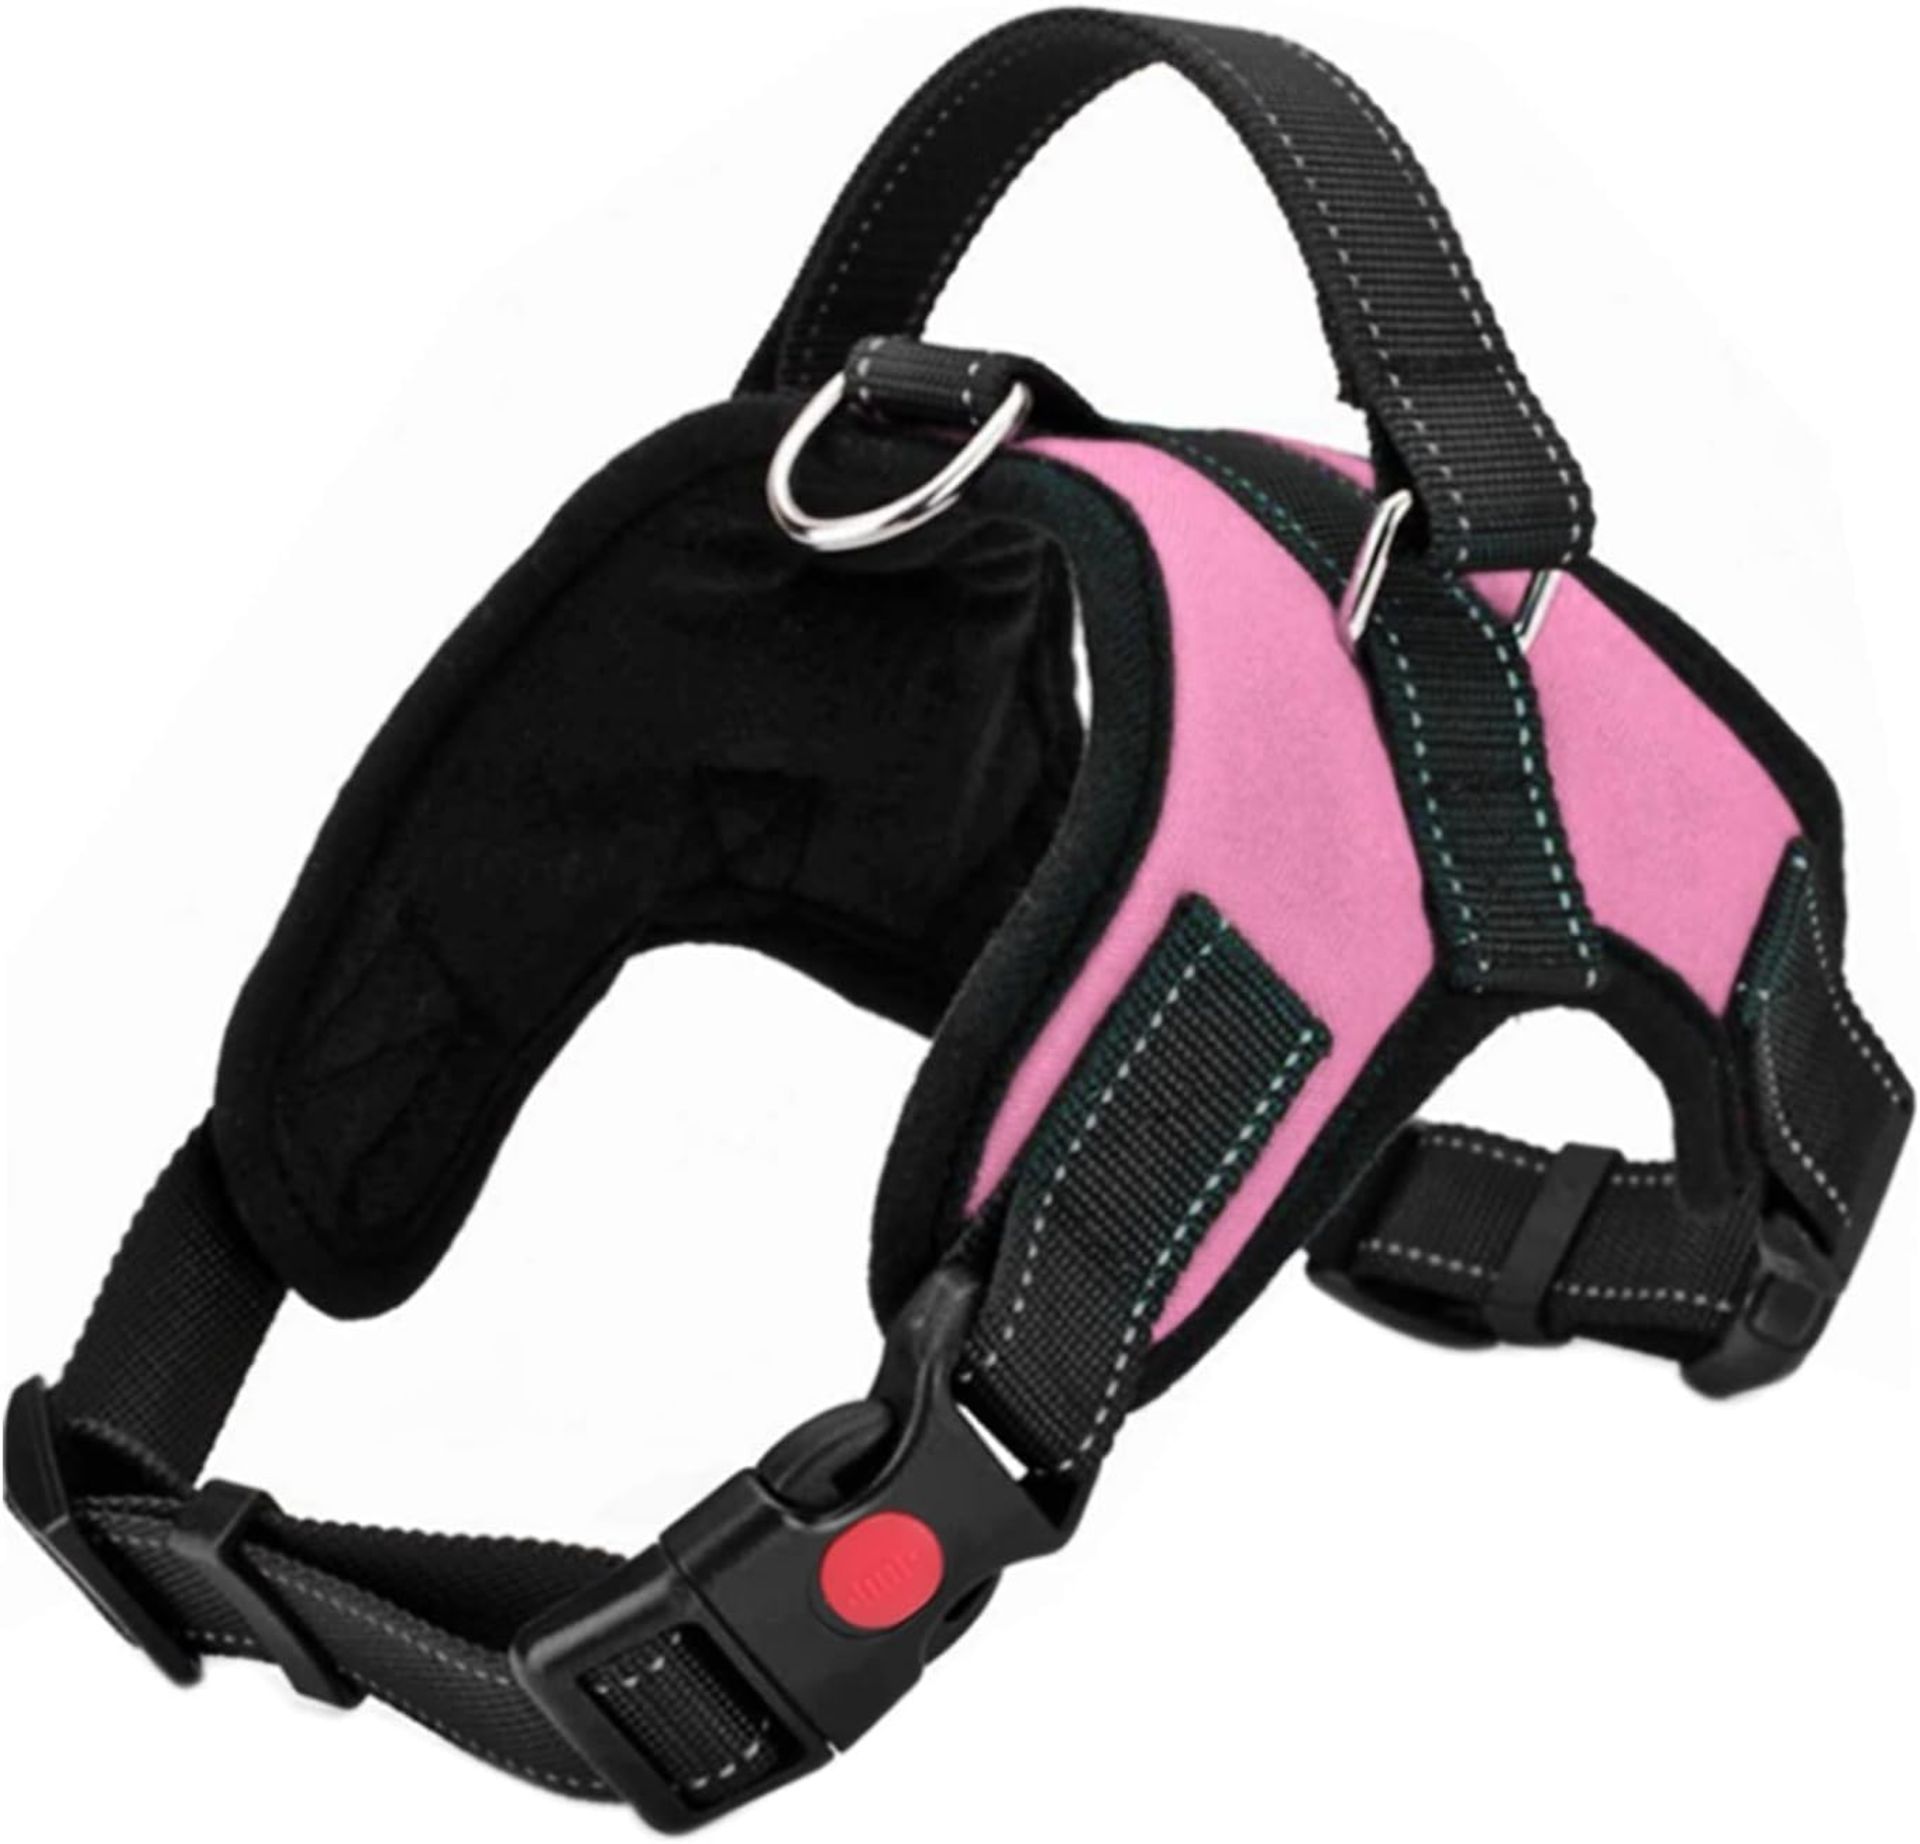 300 X JOBLOT DOG HARNESSES STRONG MIXED SIZES AND COLORS - Image 6 of 7